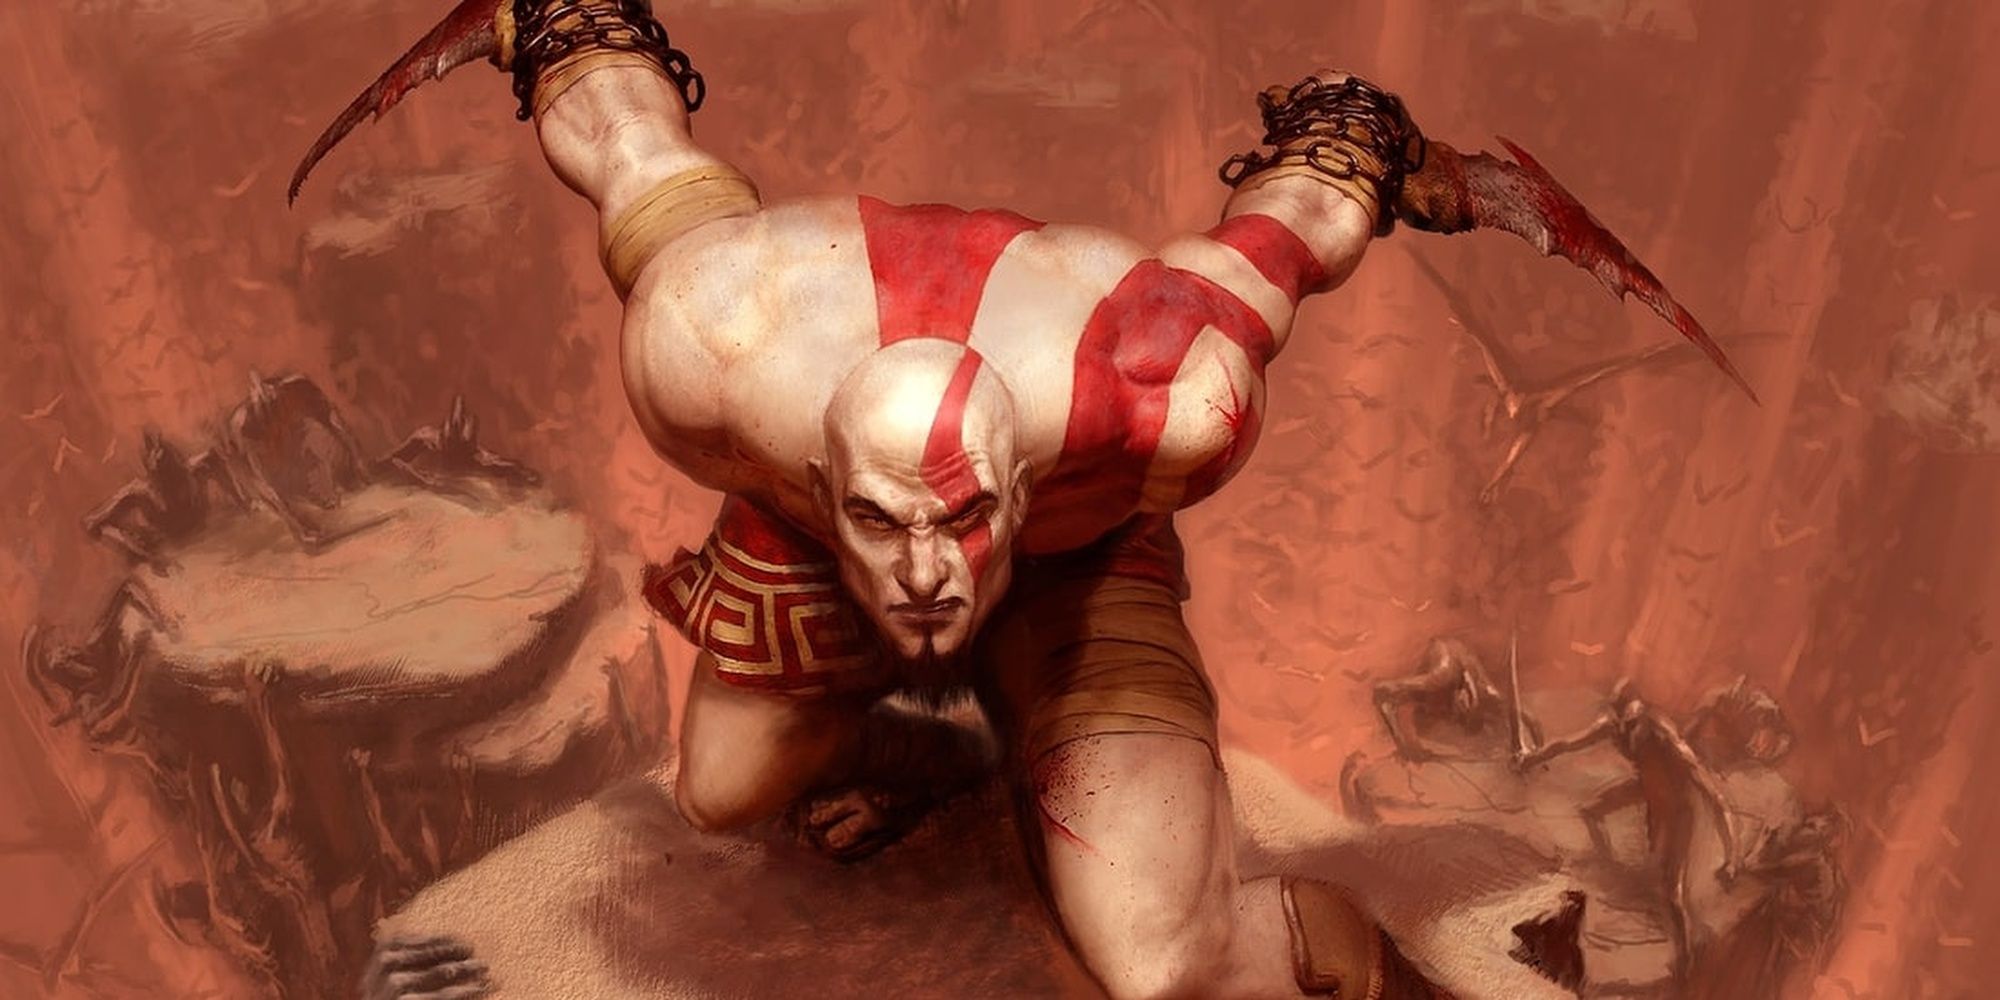 Kratos ready to attack in the original God of War